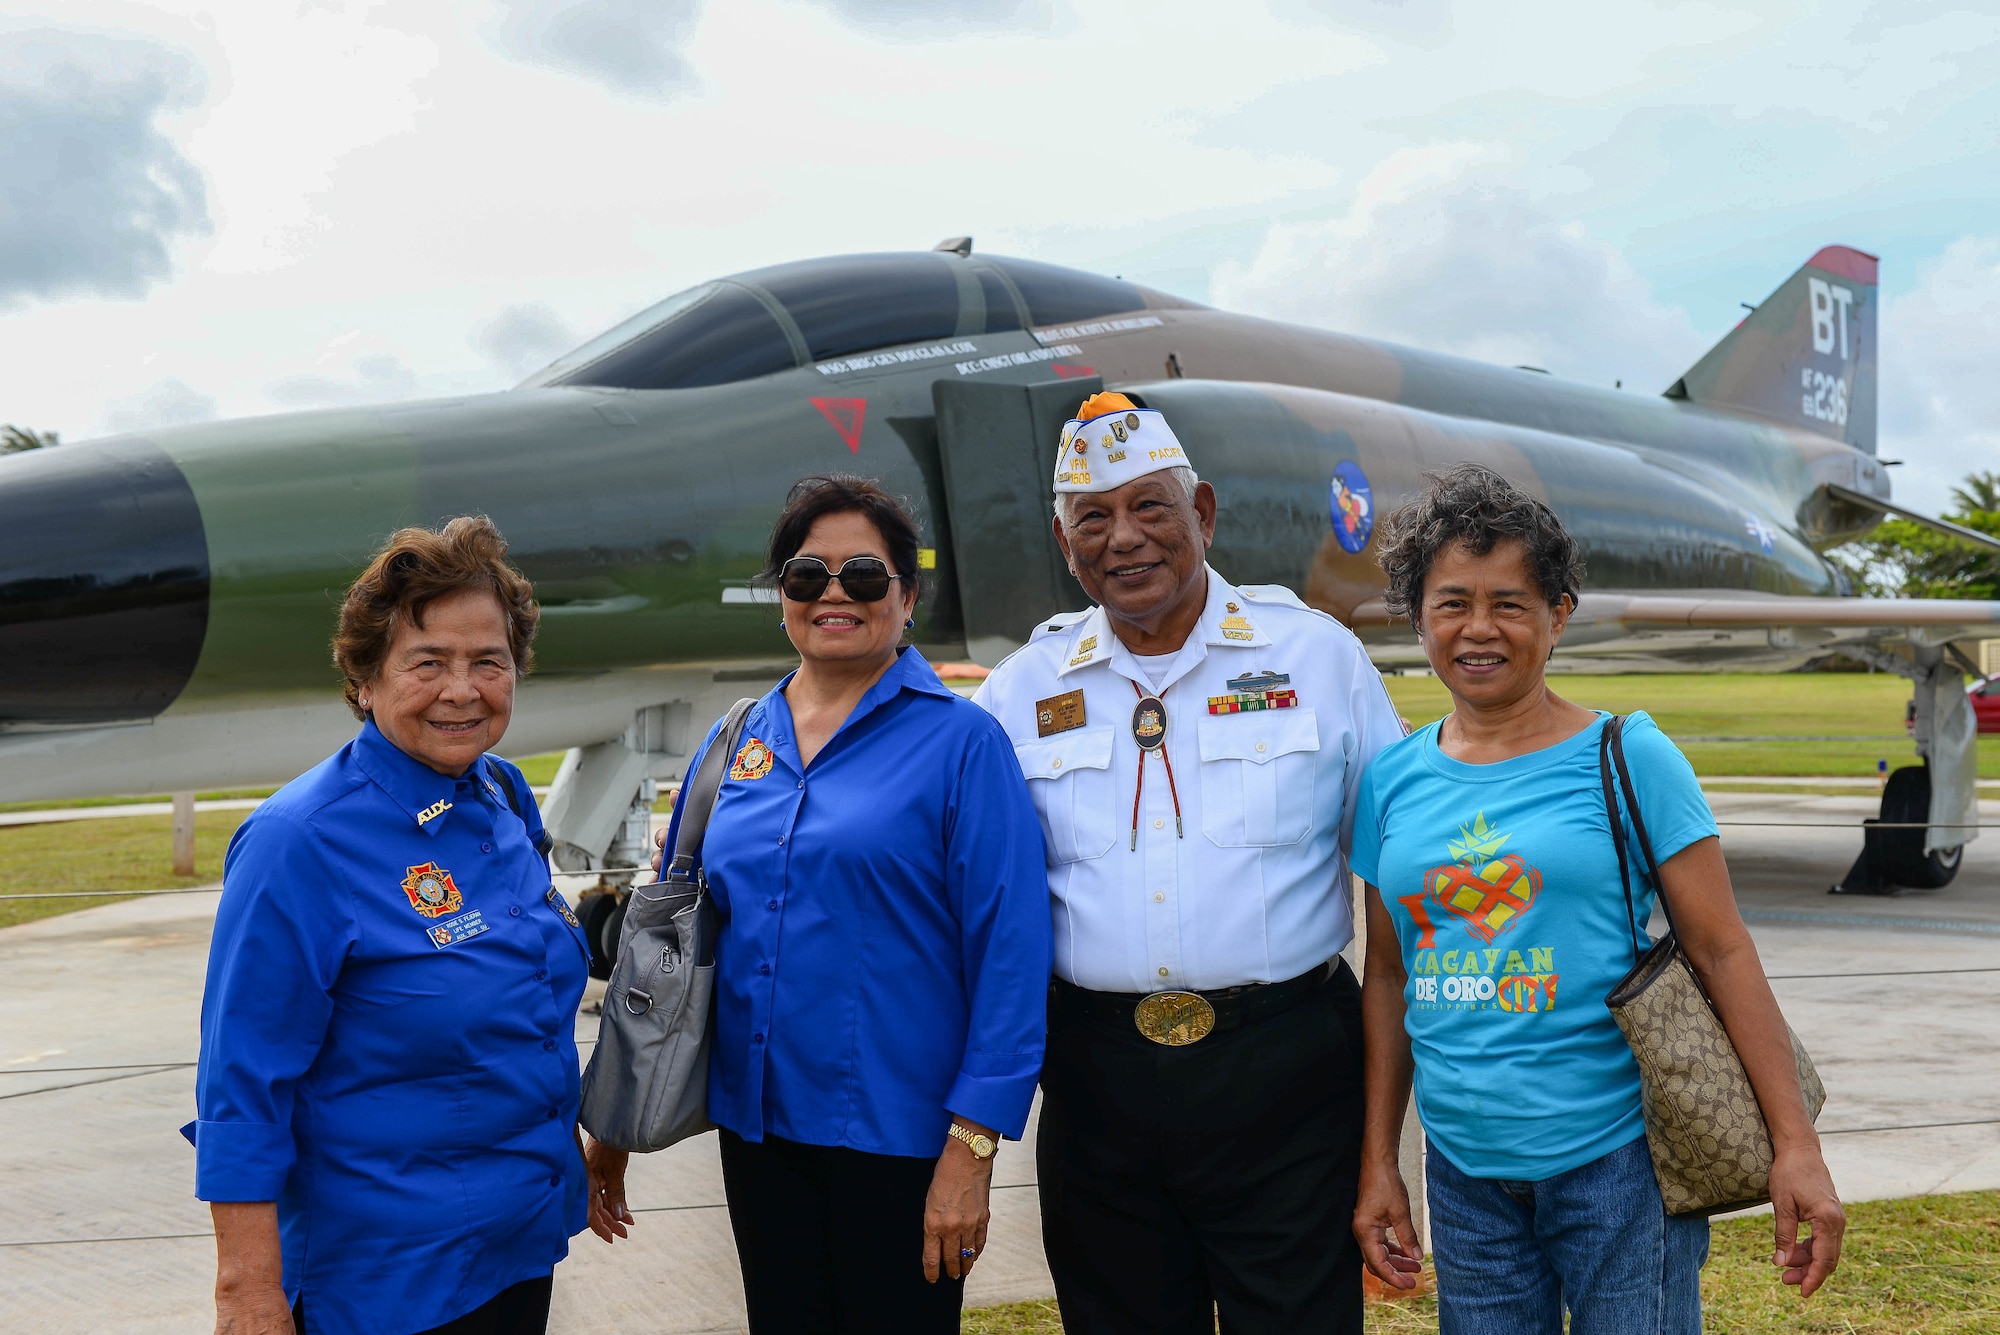 Members of the Veterans of Foreign Wars pose for a photo at the F-4E Phantom II Rededication Ceremony, April 21, 2017, at Andersen Air Force Base, Guam. The Phantom II memorial is dedicated to the men and women who gallantly supported tactical air power during the Vietnam War. (U.S. Air Force photo by Airman 1st Class Christopher Quail/Released)